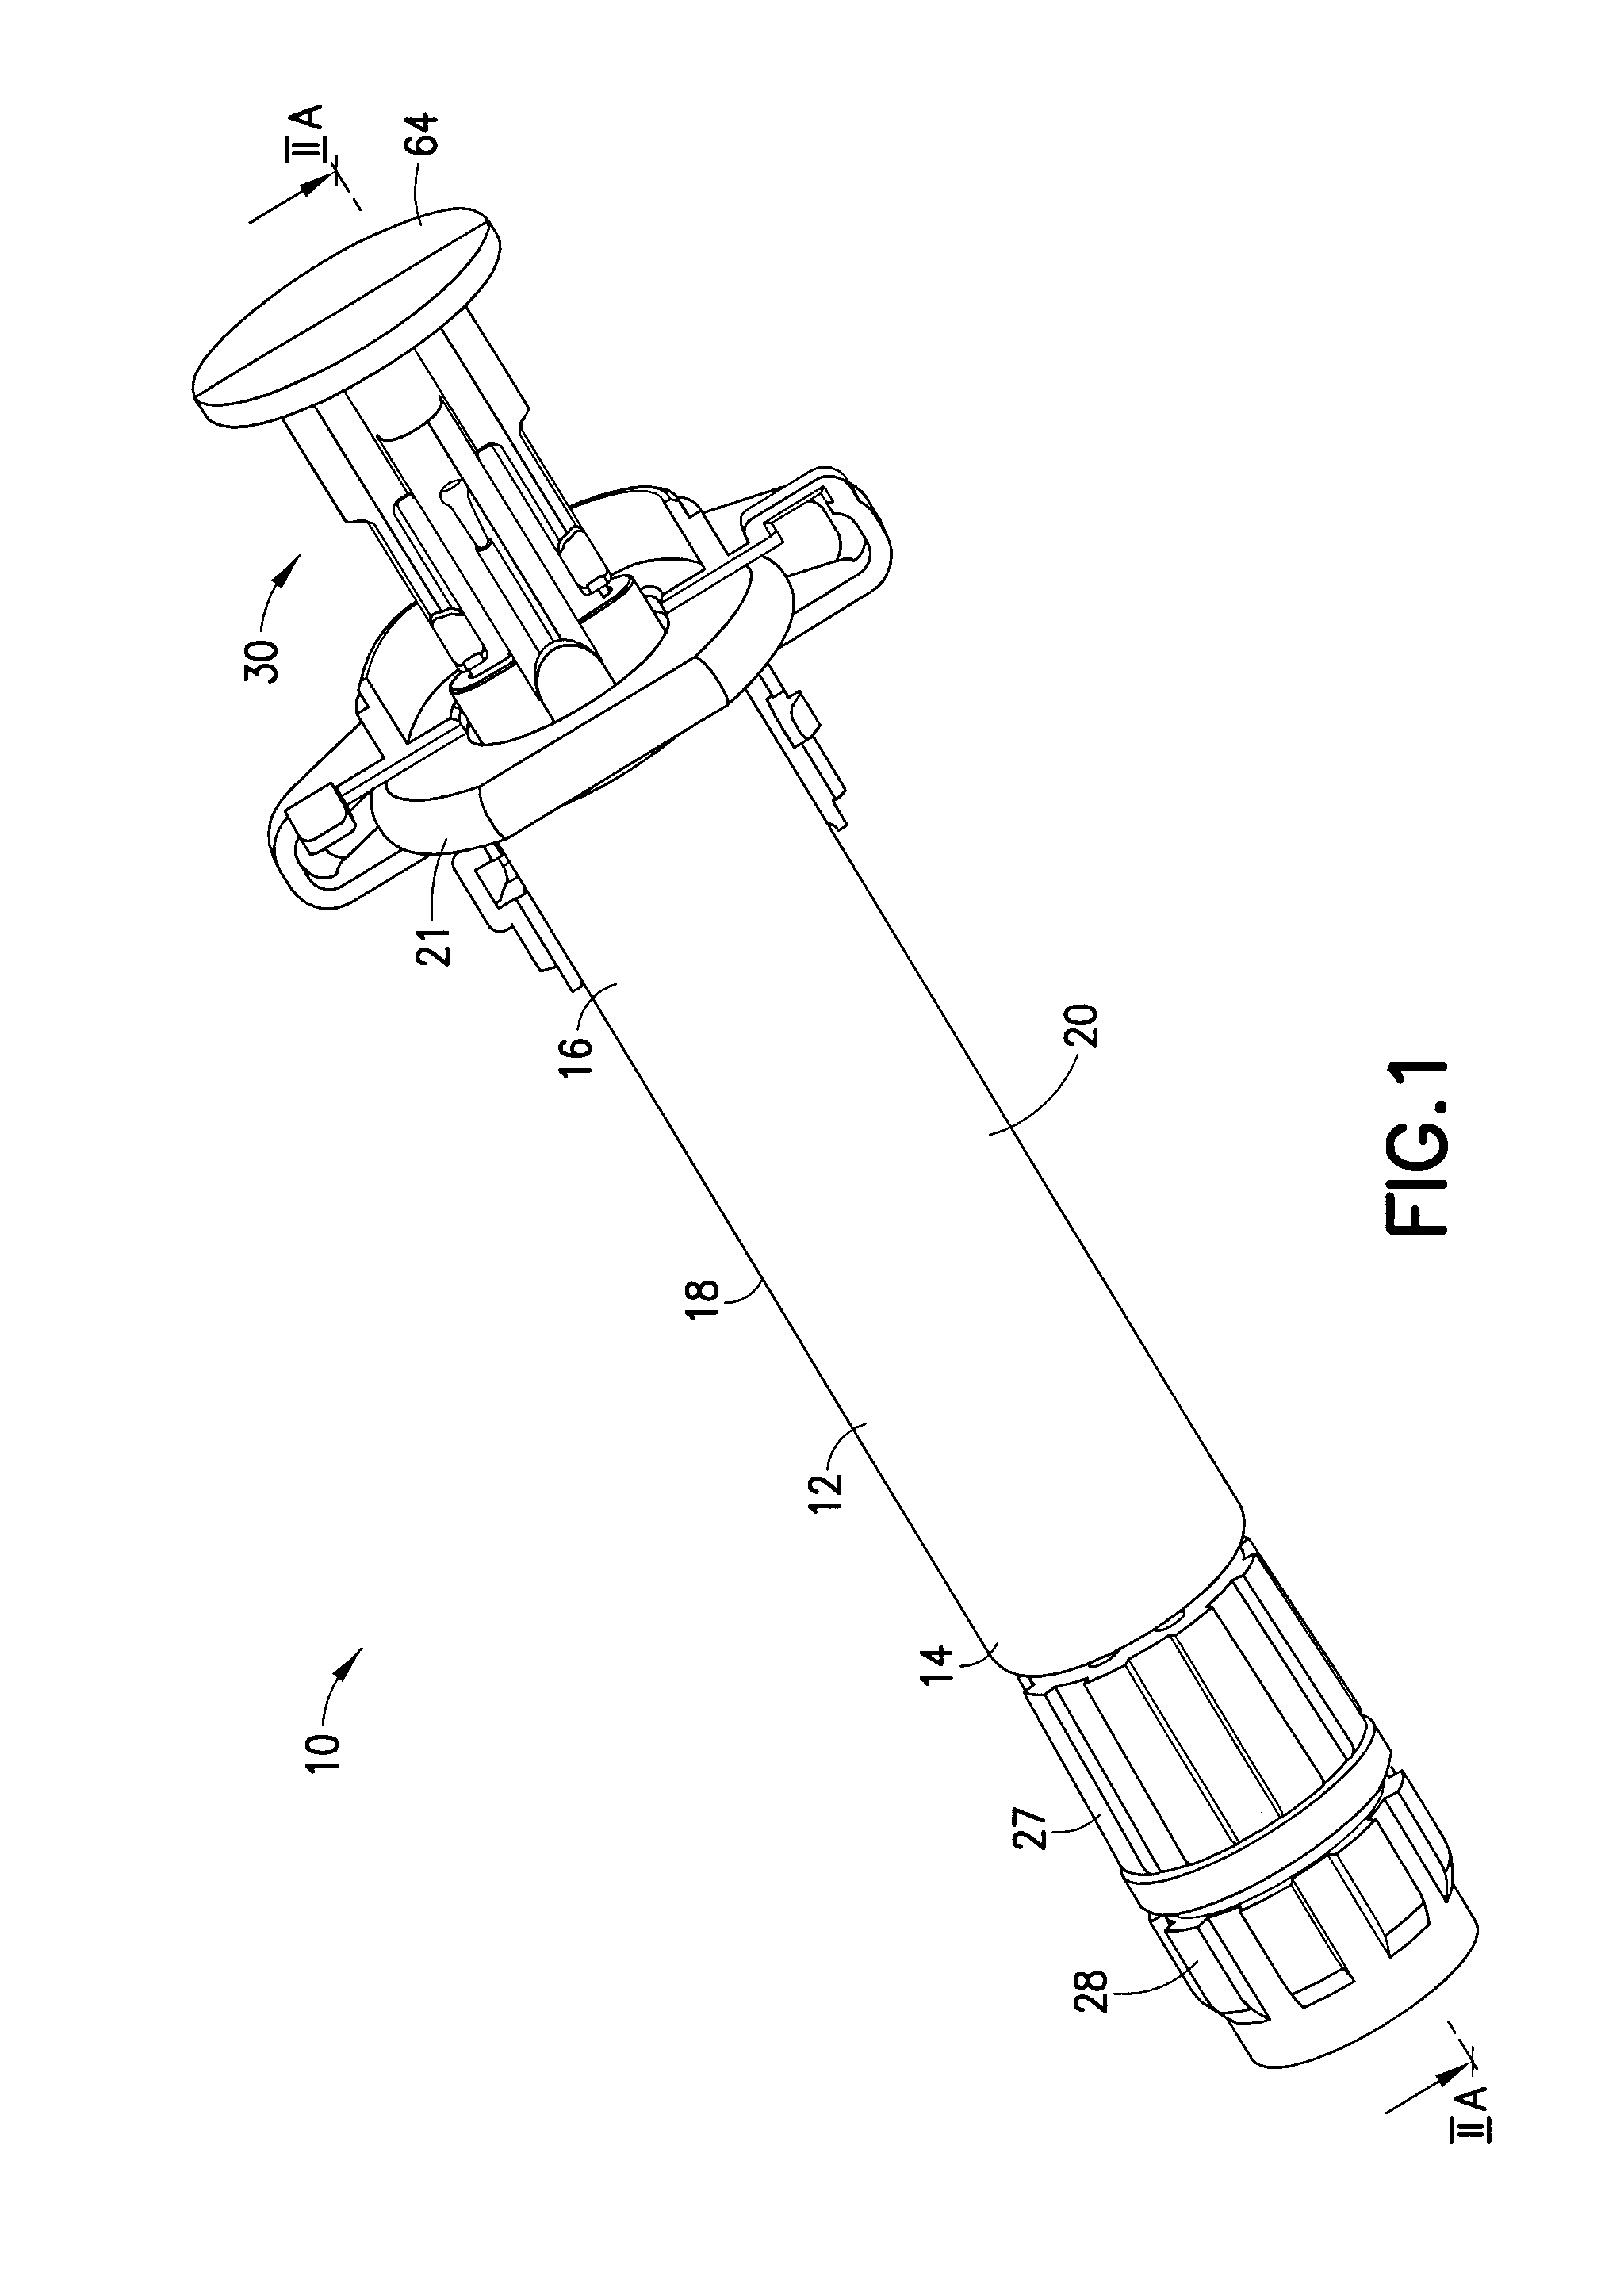 Syringe Assembly Having a Telescoping Plunger Rod